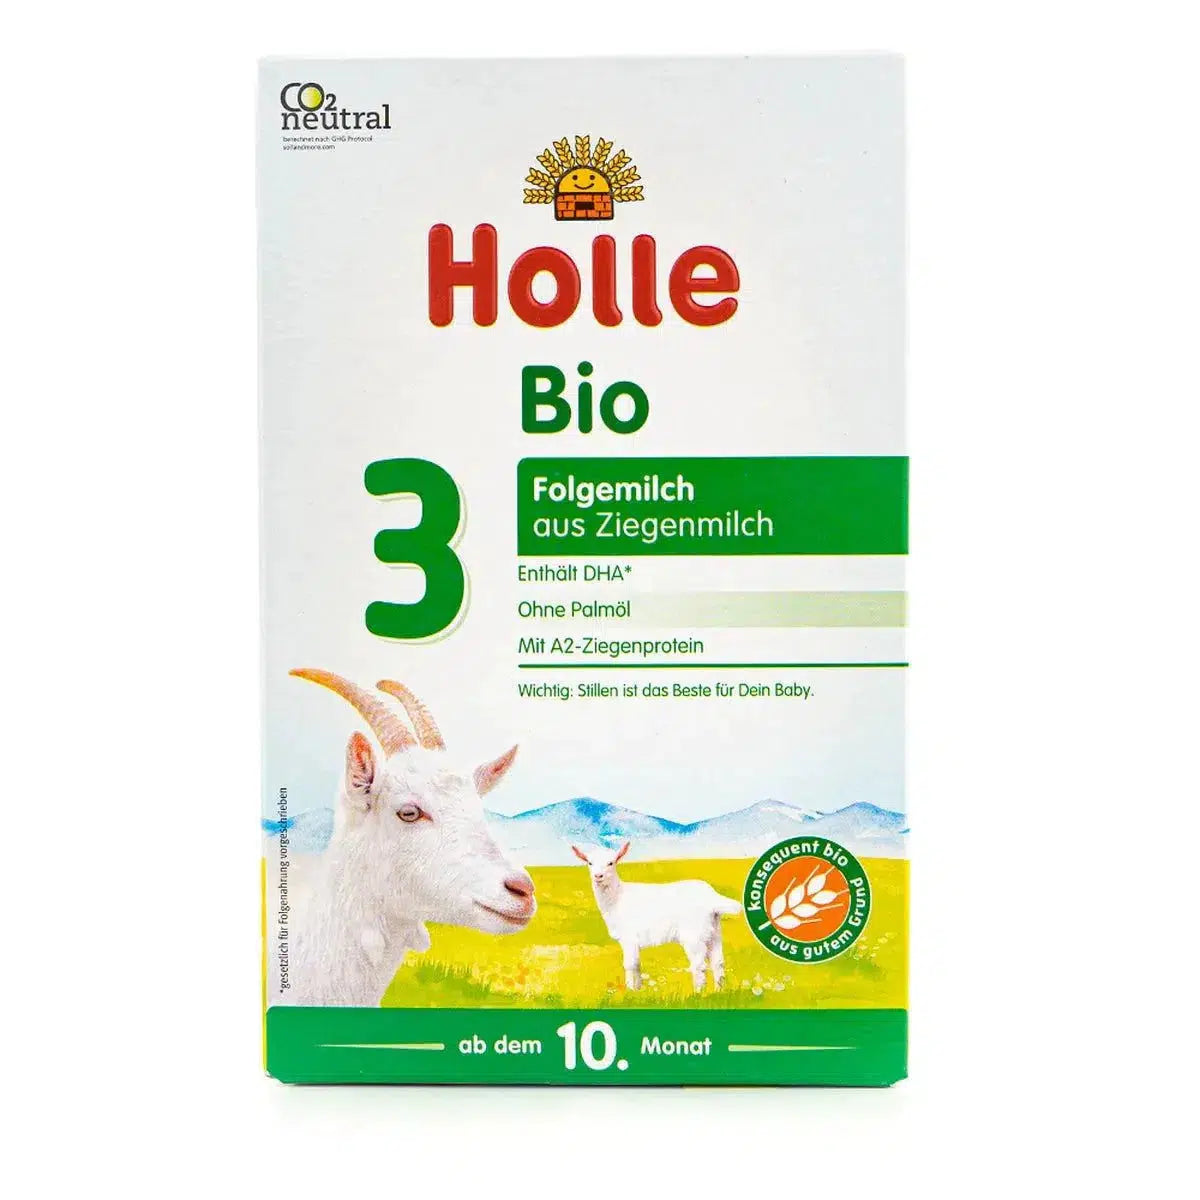 Promo Product: Holle Goat - Buy 4 Get 5